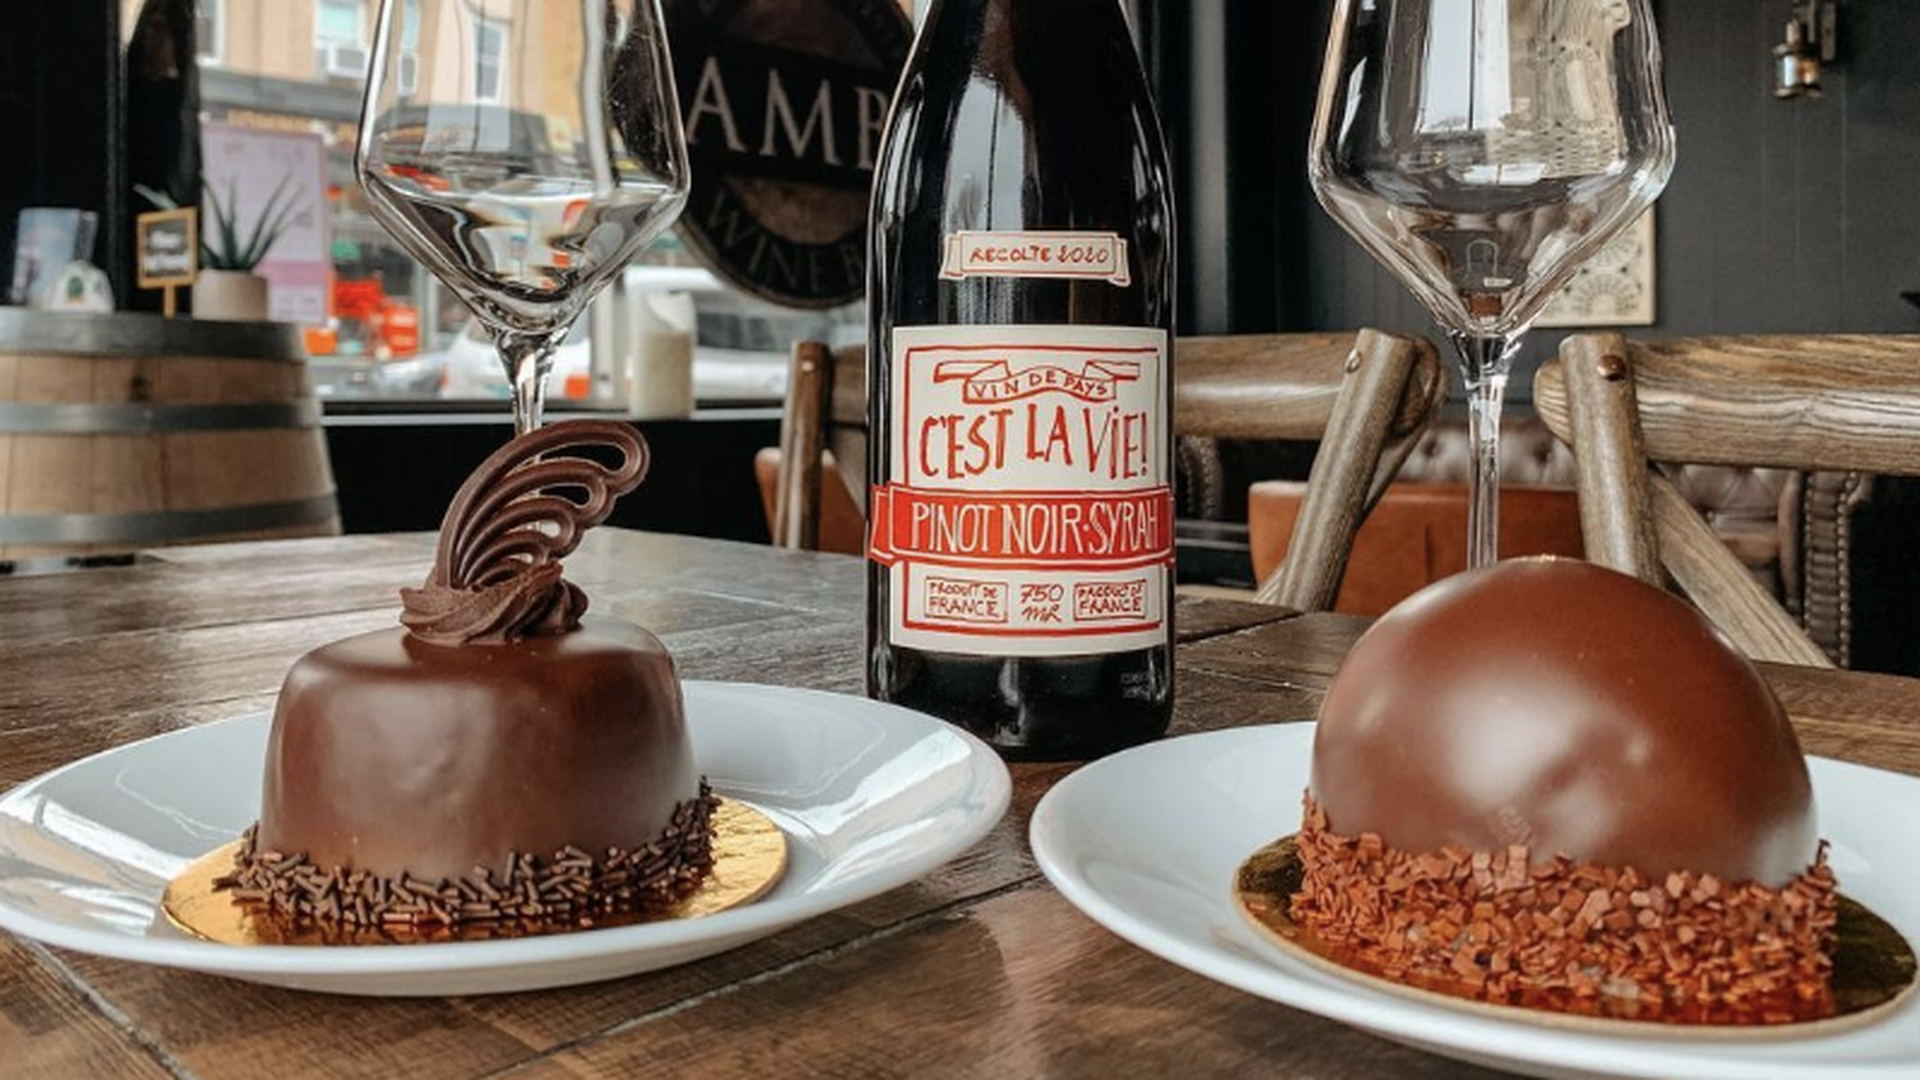 A photo of two chocolate tortes and a bottle of wine.